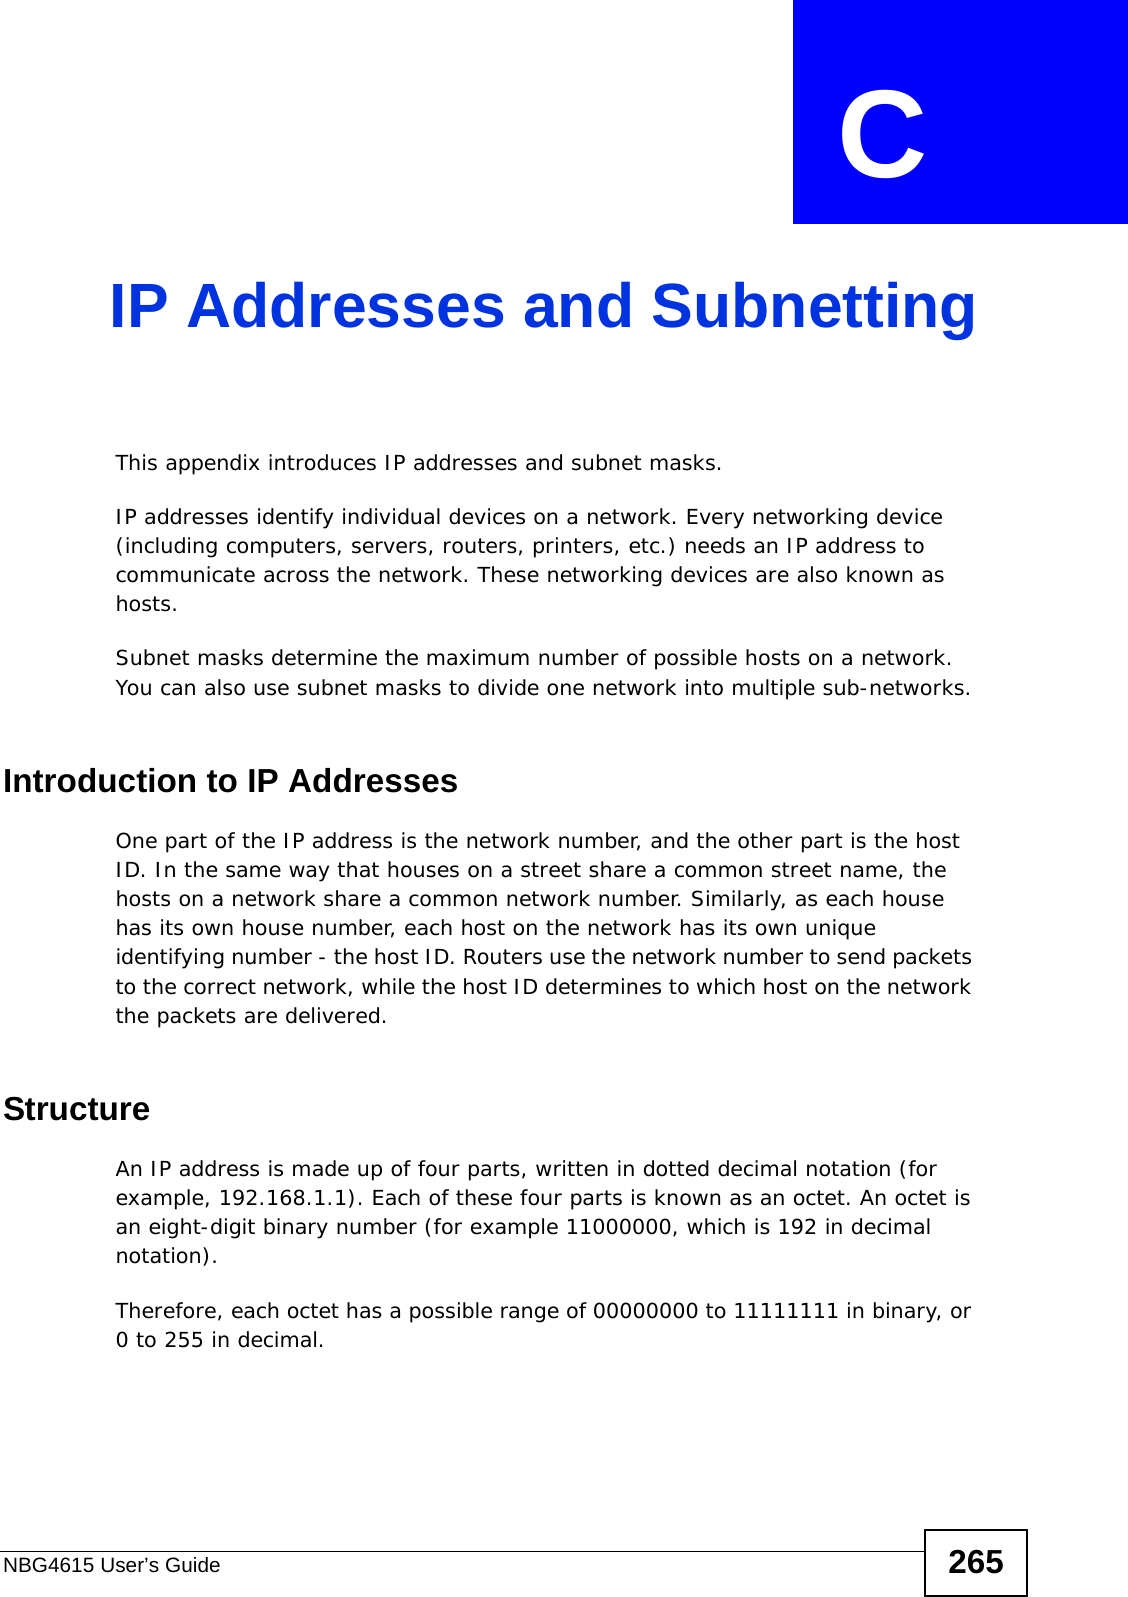 NBG4615 User’s Guide 265APPENDIX  C IP Addresses and SubnettingThis appendix introduces IP addresses and subnet masks. IP addresses identify individual devices on a network. Every networking device (including computers, servers, routers, printers, etc.) needs an IP address to communicate across the network. These networking devices are also known as hosts.Subnet masks determine the maximum number of possible hosts on a network. You can also use subnet masks to divide one network into multiple sub-networks.Introduction to IP AddressesOne part of the IP address is the network number, and the other part is the host ID. In the same way that houses on a street share a common street name, the hosts on a network share a common network number. Similarly, as each house has its own house number, each host on the network has its own unique identifying number - the host ID. Routers use the network number to send packets to the correct network, while the host ID determines to which host on the network the packets are delivered.StructureAn IP address is made up of four parts, written in dotted decimal notation (for example, 192.168.1.1). Each of these four parts is known as an octet. An octet is an eight-digit binary number (for example 11000000, which is 192 in decimal notation). Therefore, each octet has a possible range of 00000000 to 11111111 in binary, or 0 to 255 in decimal.